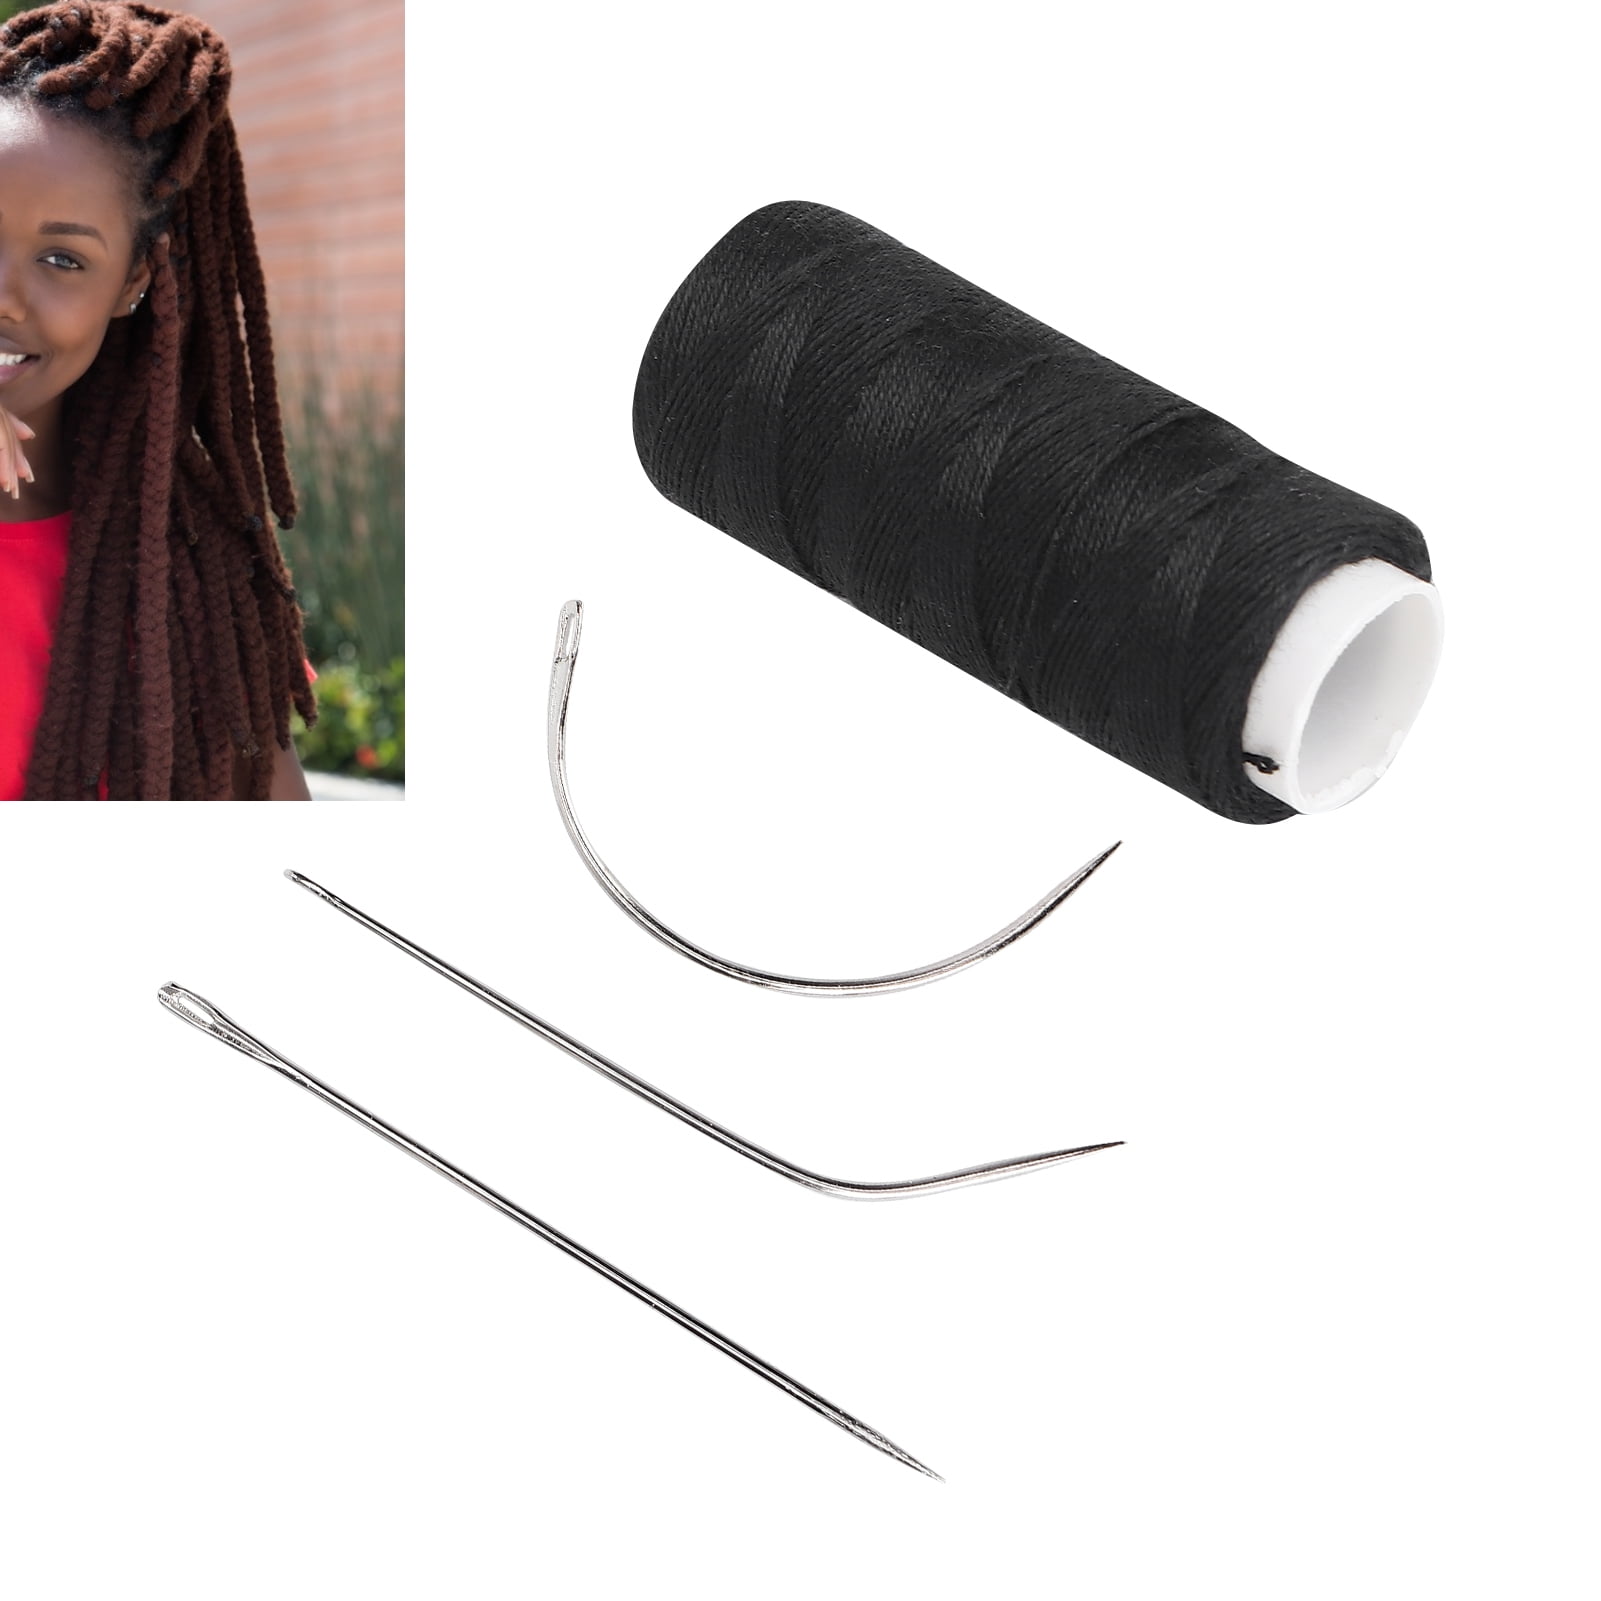 Ryalan Weaving Needle Combo Deal 3pcs Black Thread with 10pcs Needle for Making Wig Sewing Hair Weft Hair Weave Extension (Big